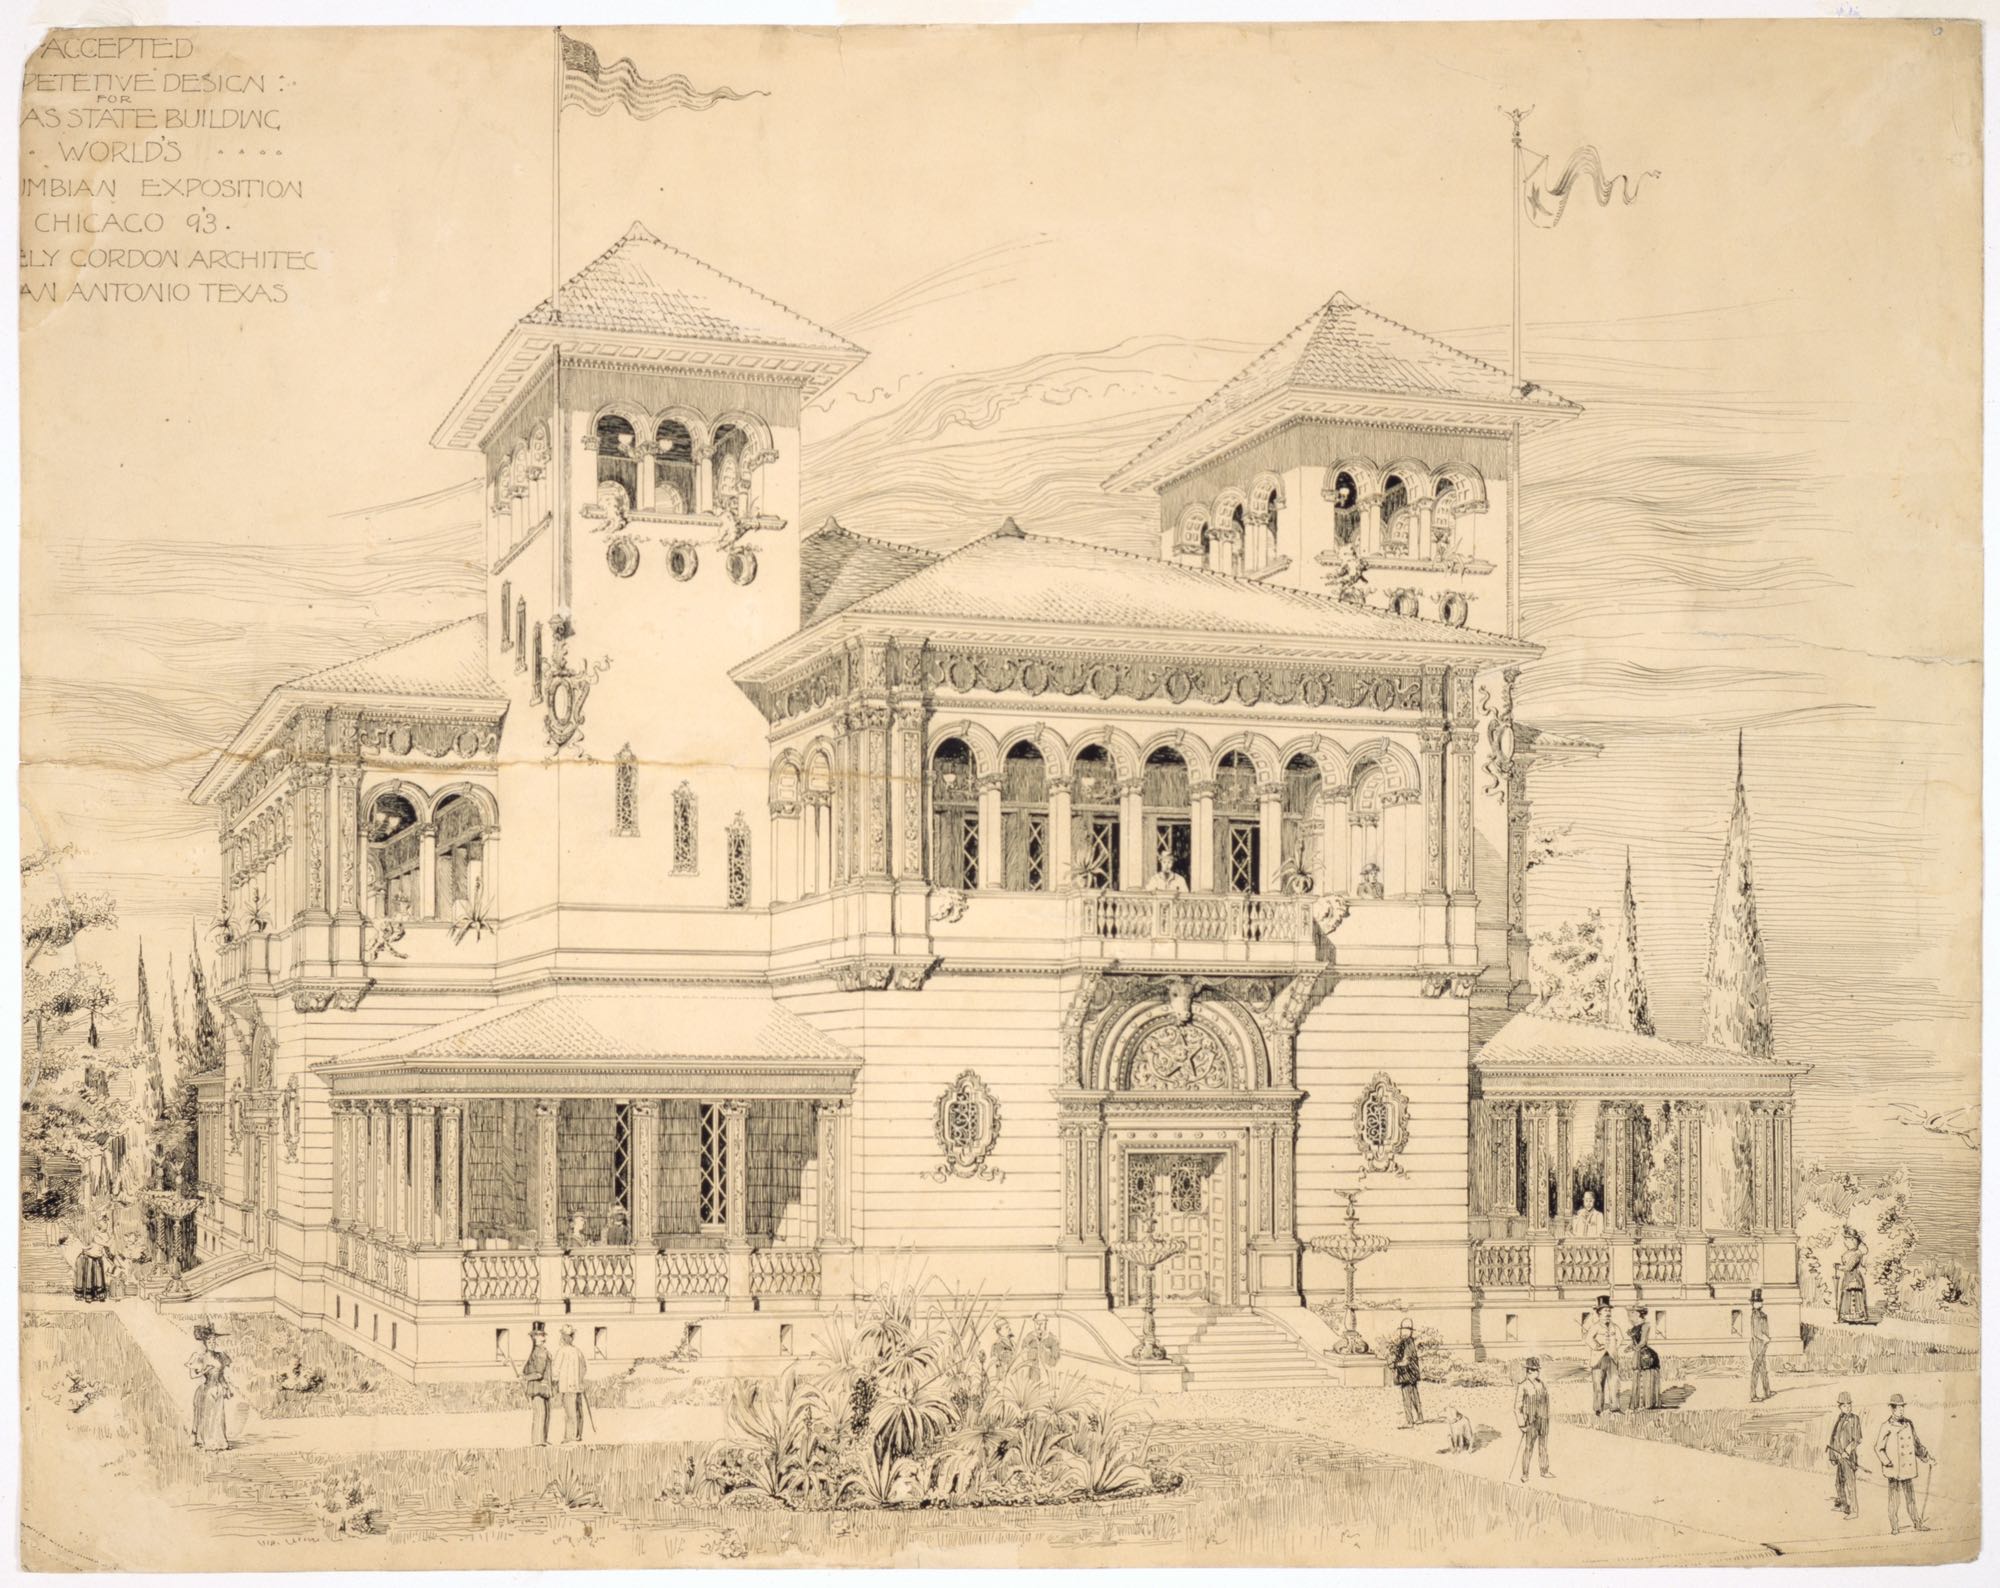 The image is a rendering of the Texas state building for the World's Columbian Exposition. From the Alexander Architectural Archives